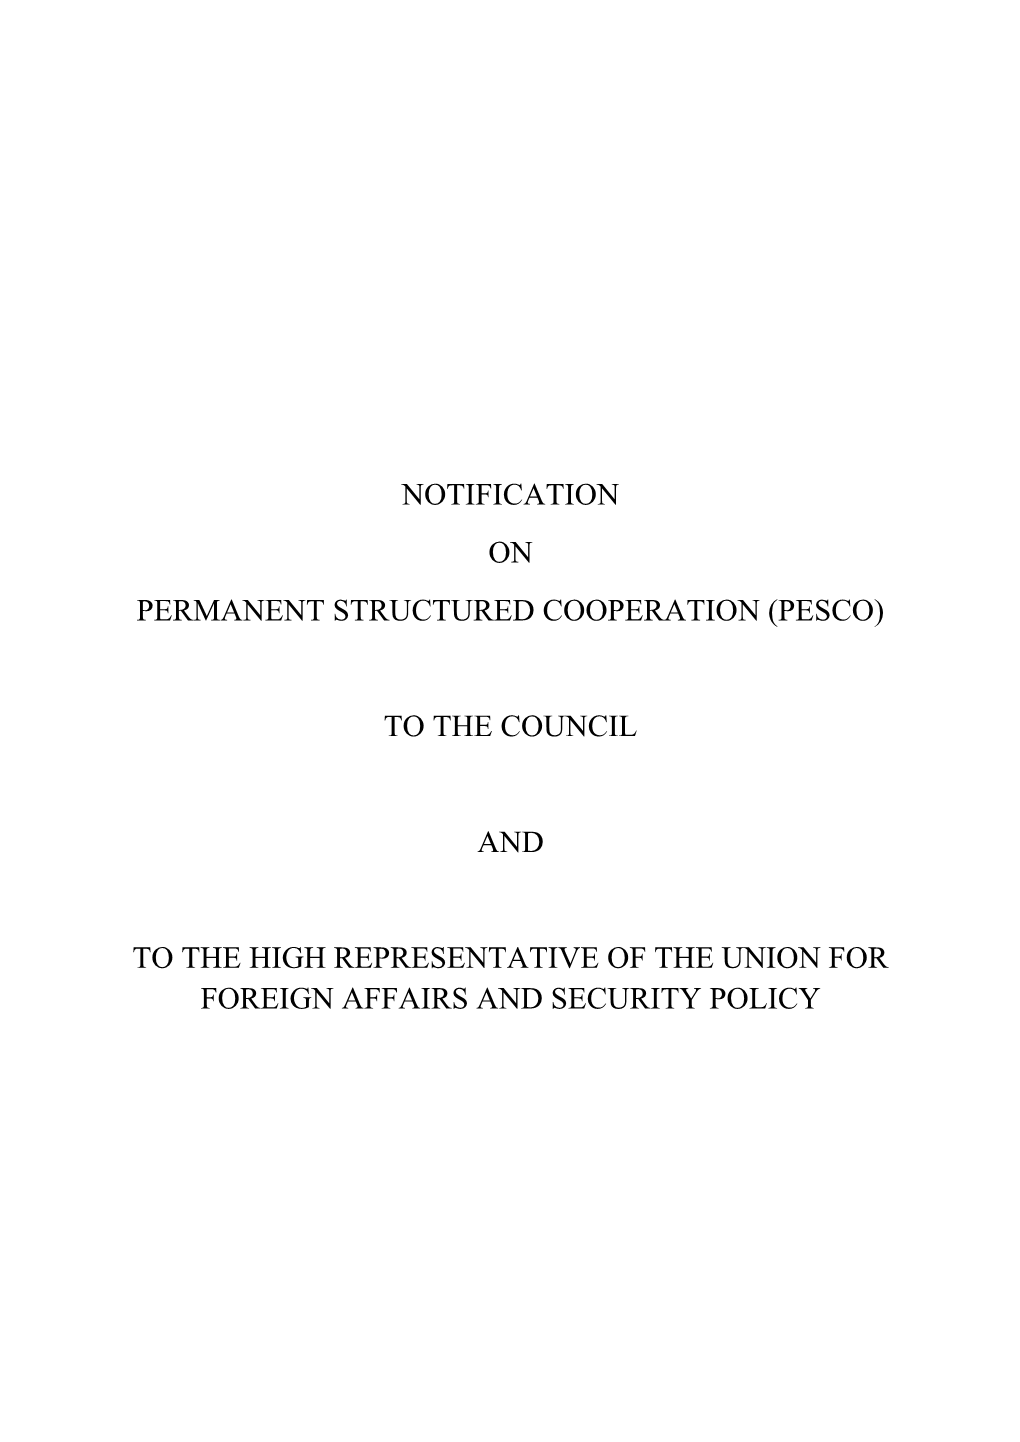 Notification on Permanent Structured Cooperation (Pesco)